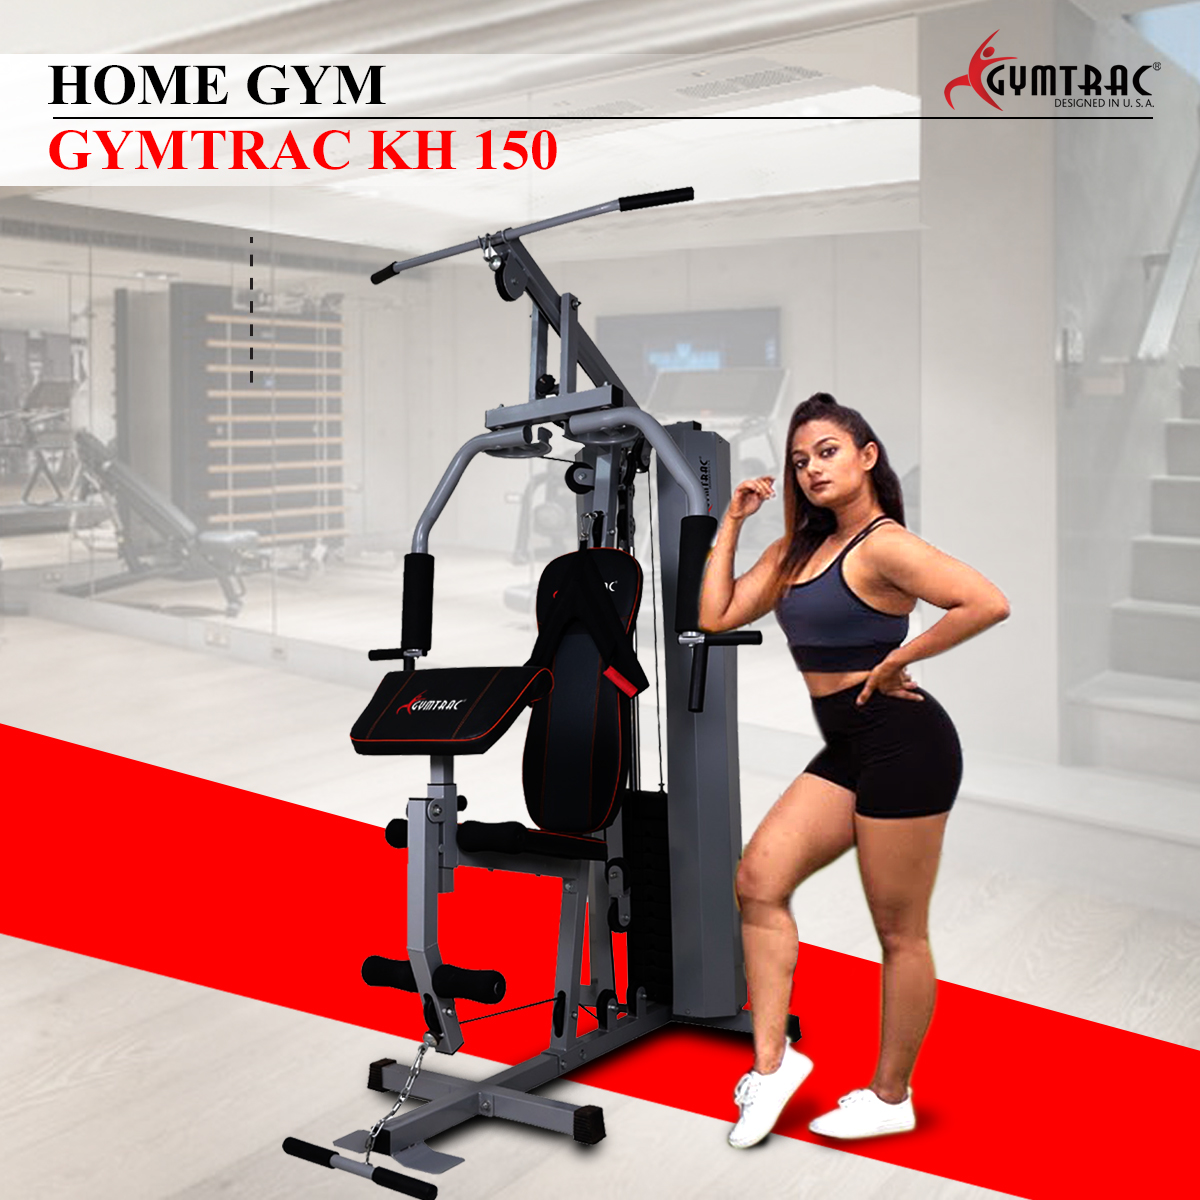 GYMTRAC KH 150 HOME GYM WITH SHOULDER